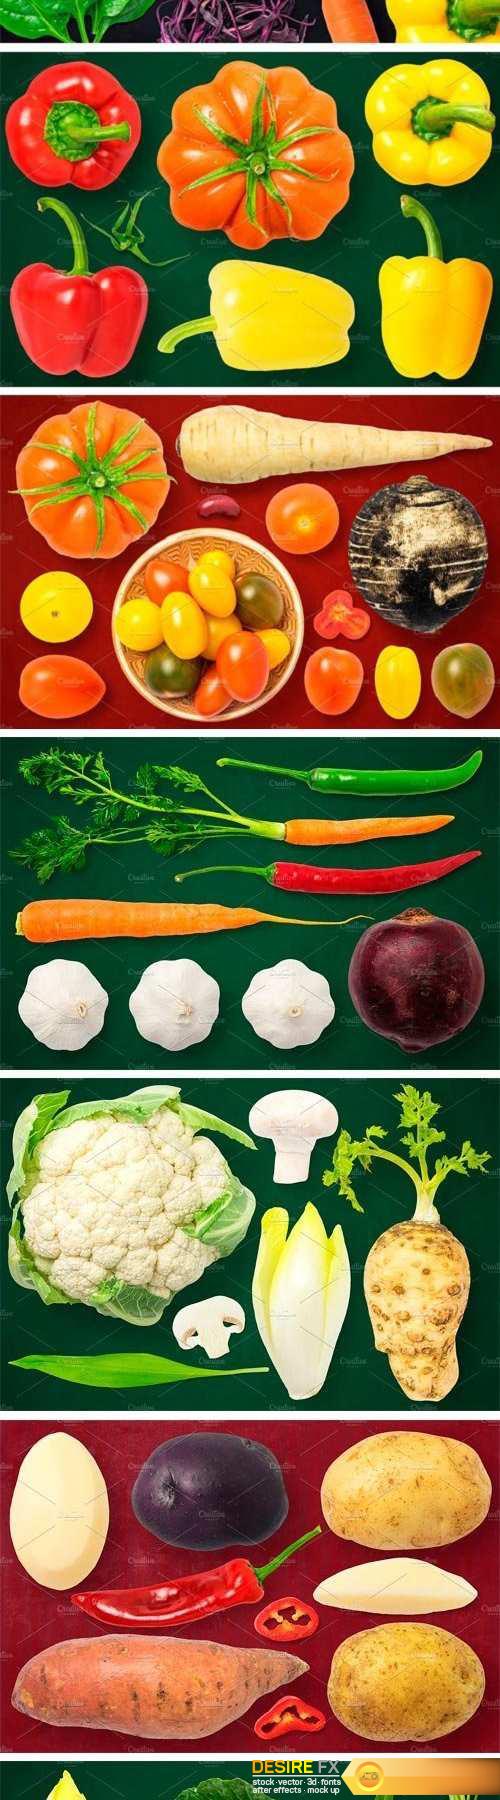 Isolated Food Items Vol.15 | Vegetables Part 2 - 1500310